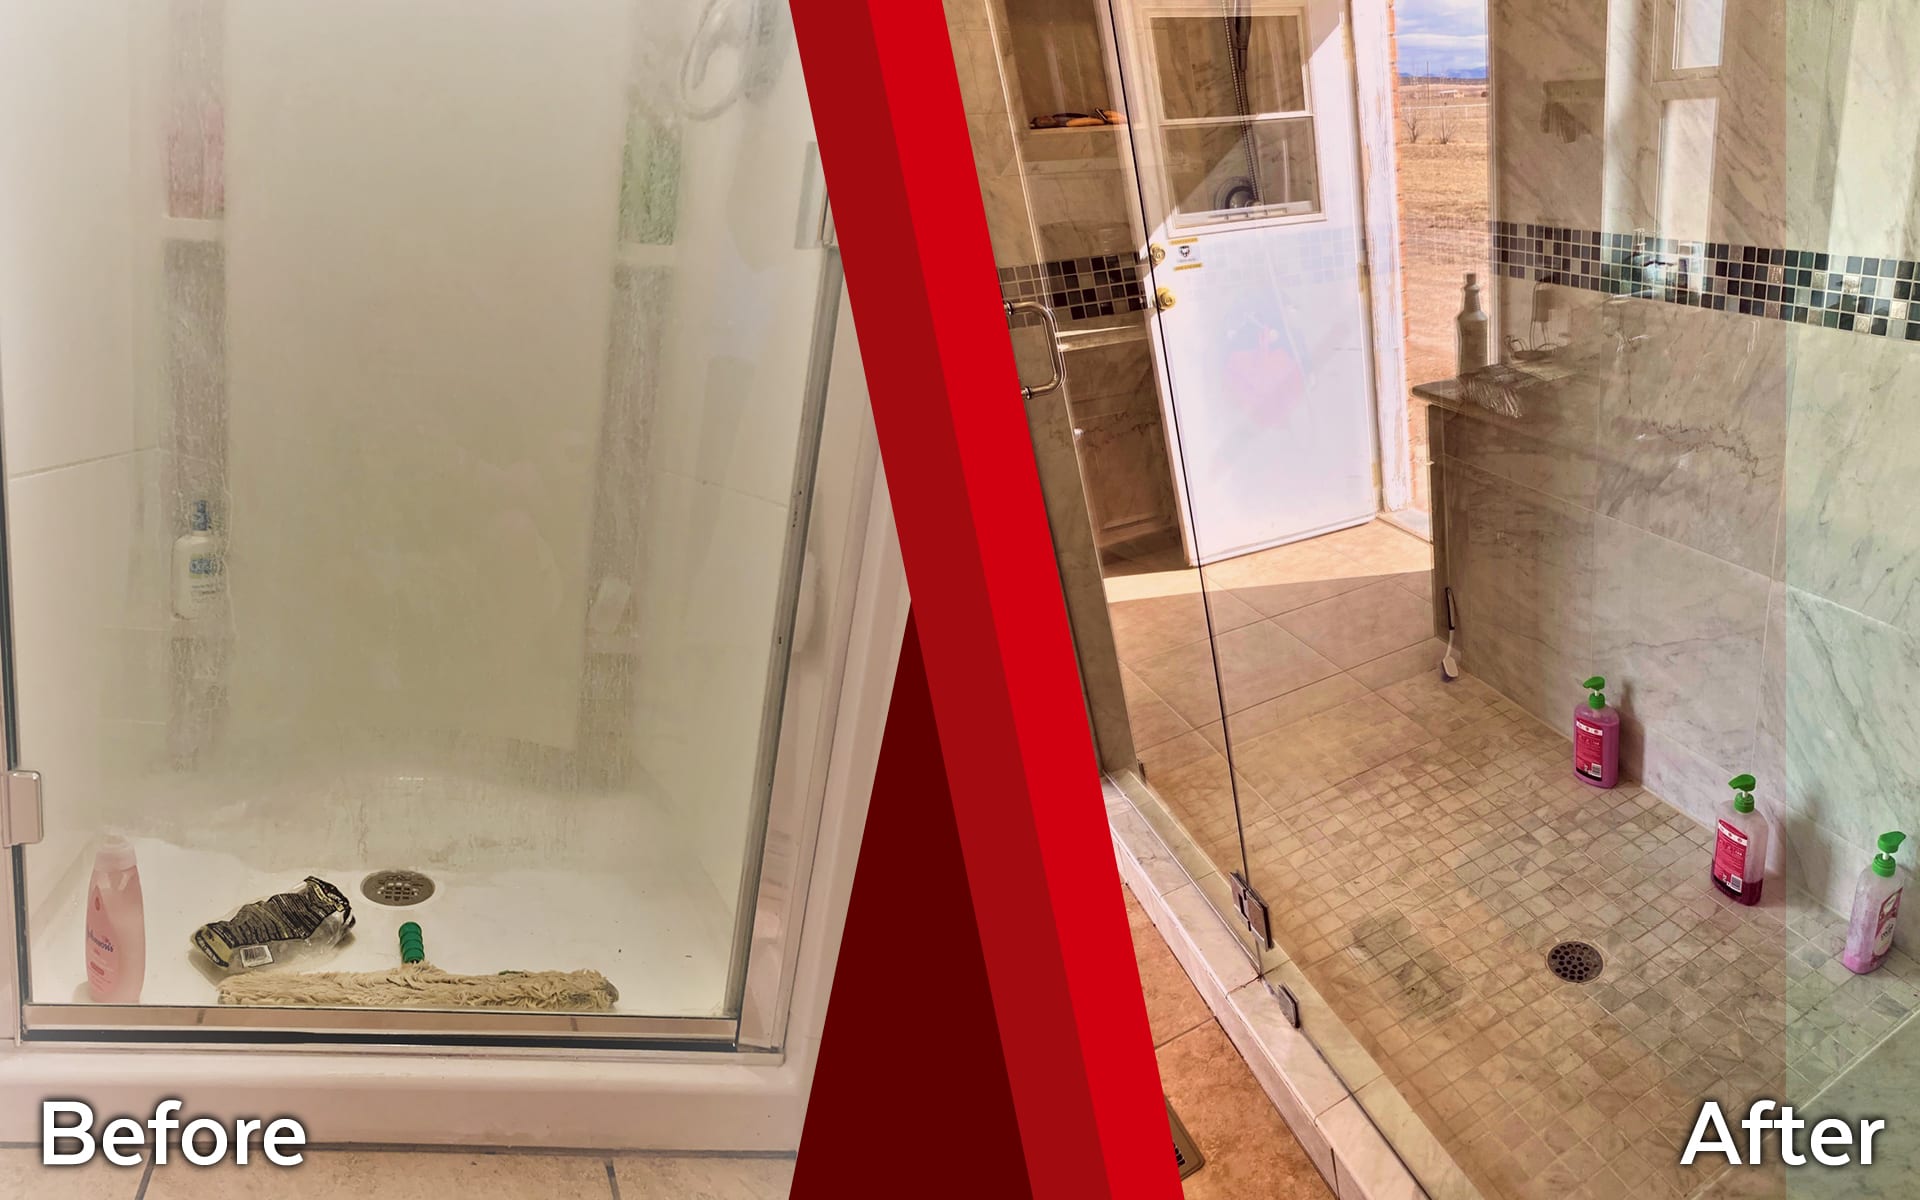 Shower glass before and clean after.